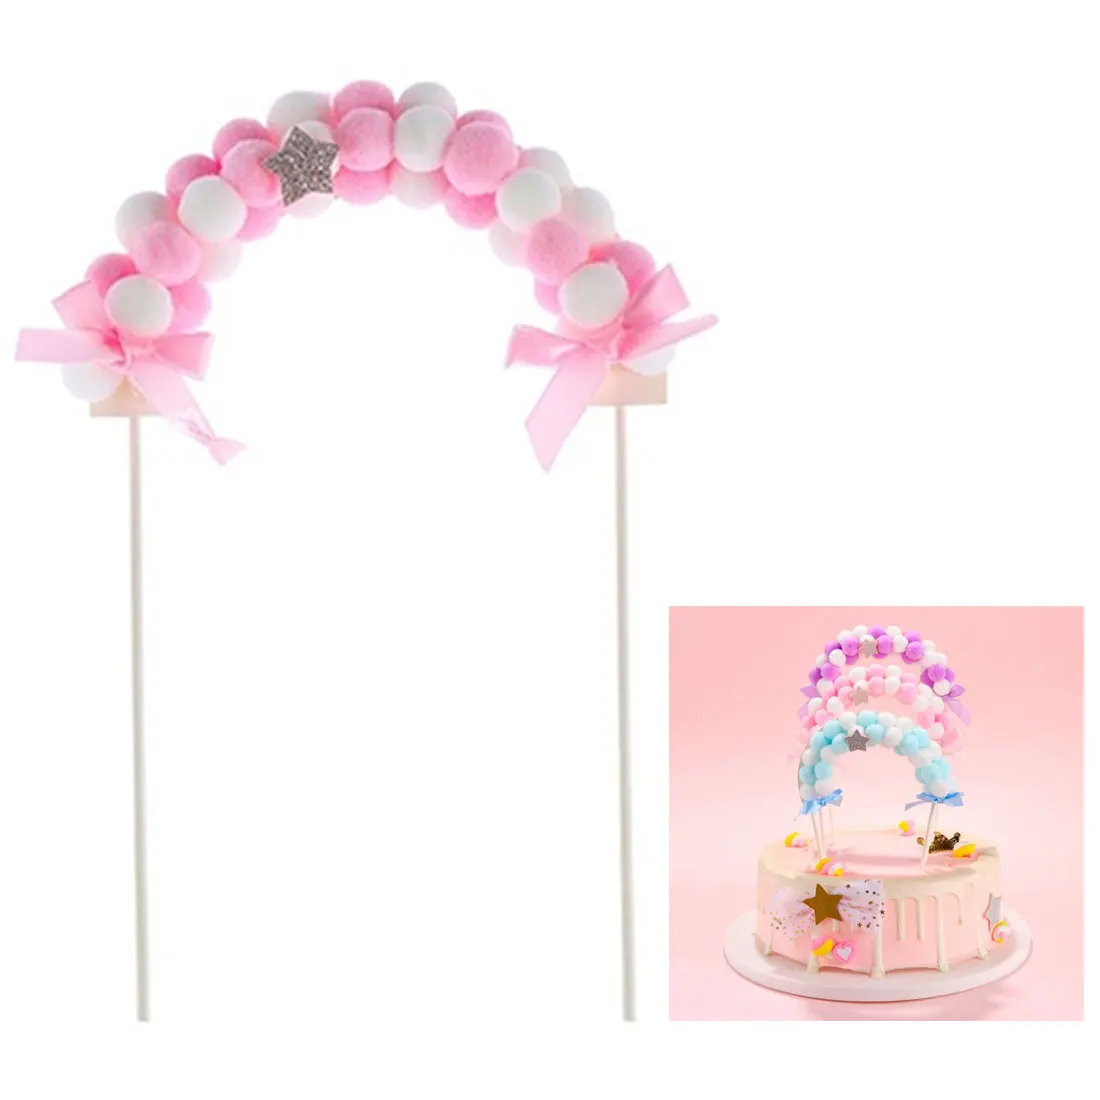 Pompom Soft Cloud Cake Topper Gifts Birthday Flags Dessert Party Supplies UK